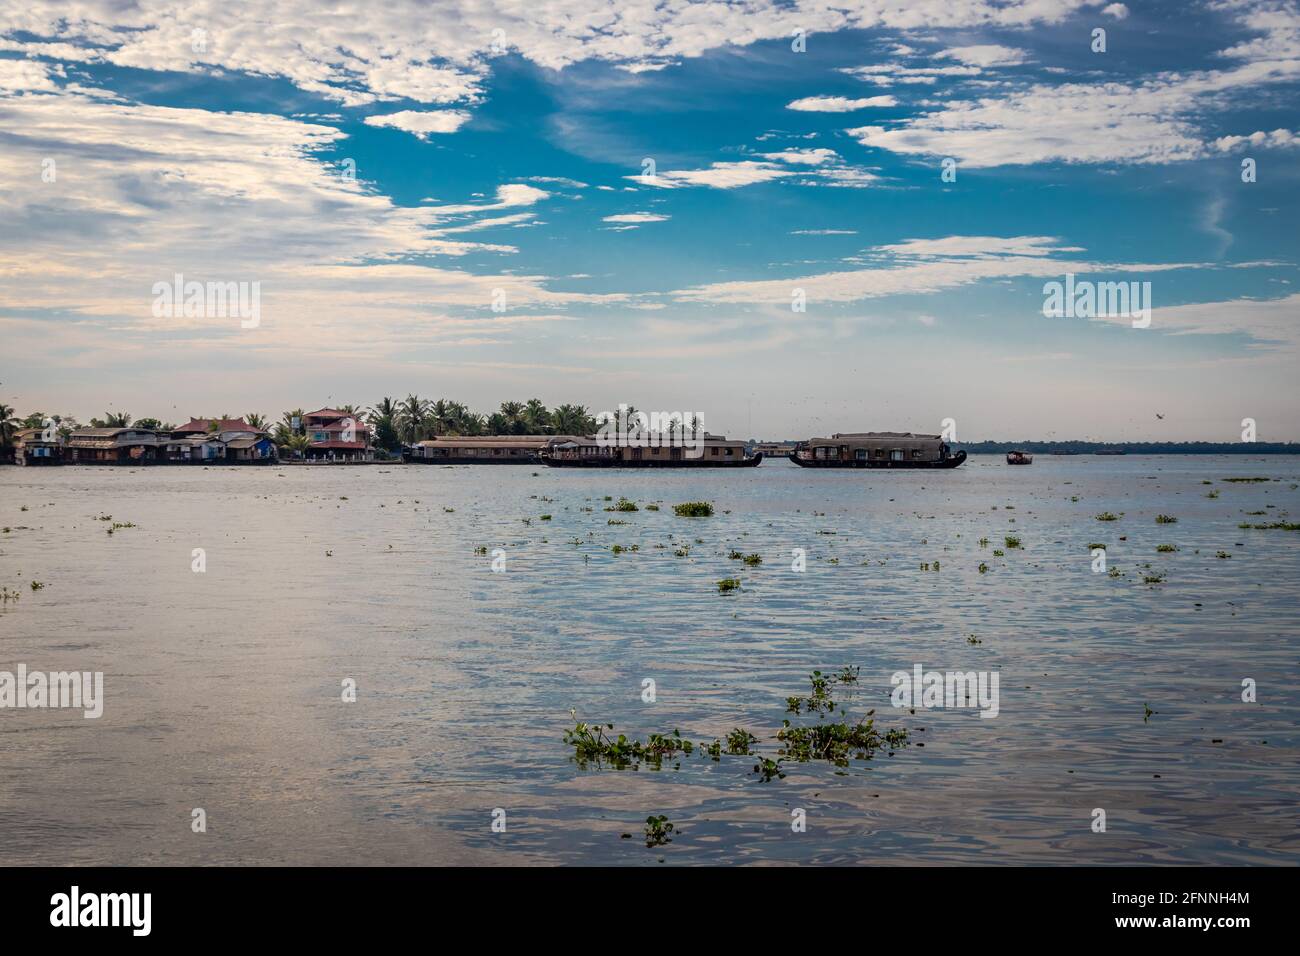 Backwater view at alleppey kerala india with blue sky and palm tree Stock Photo